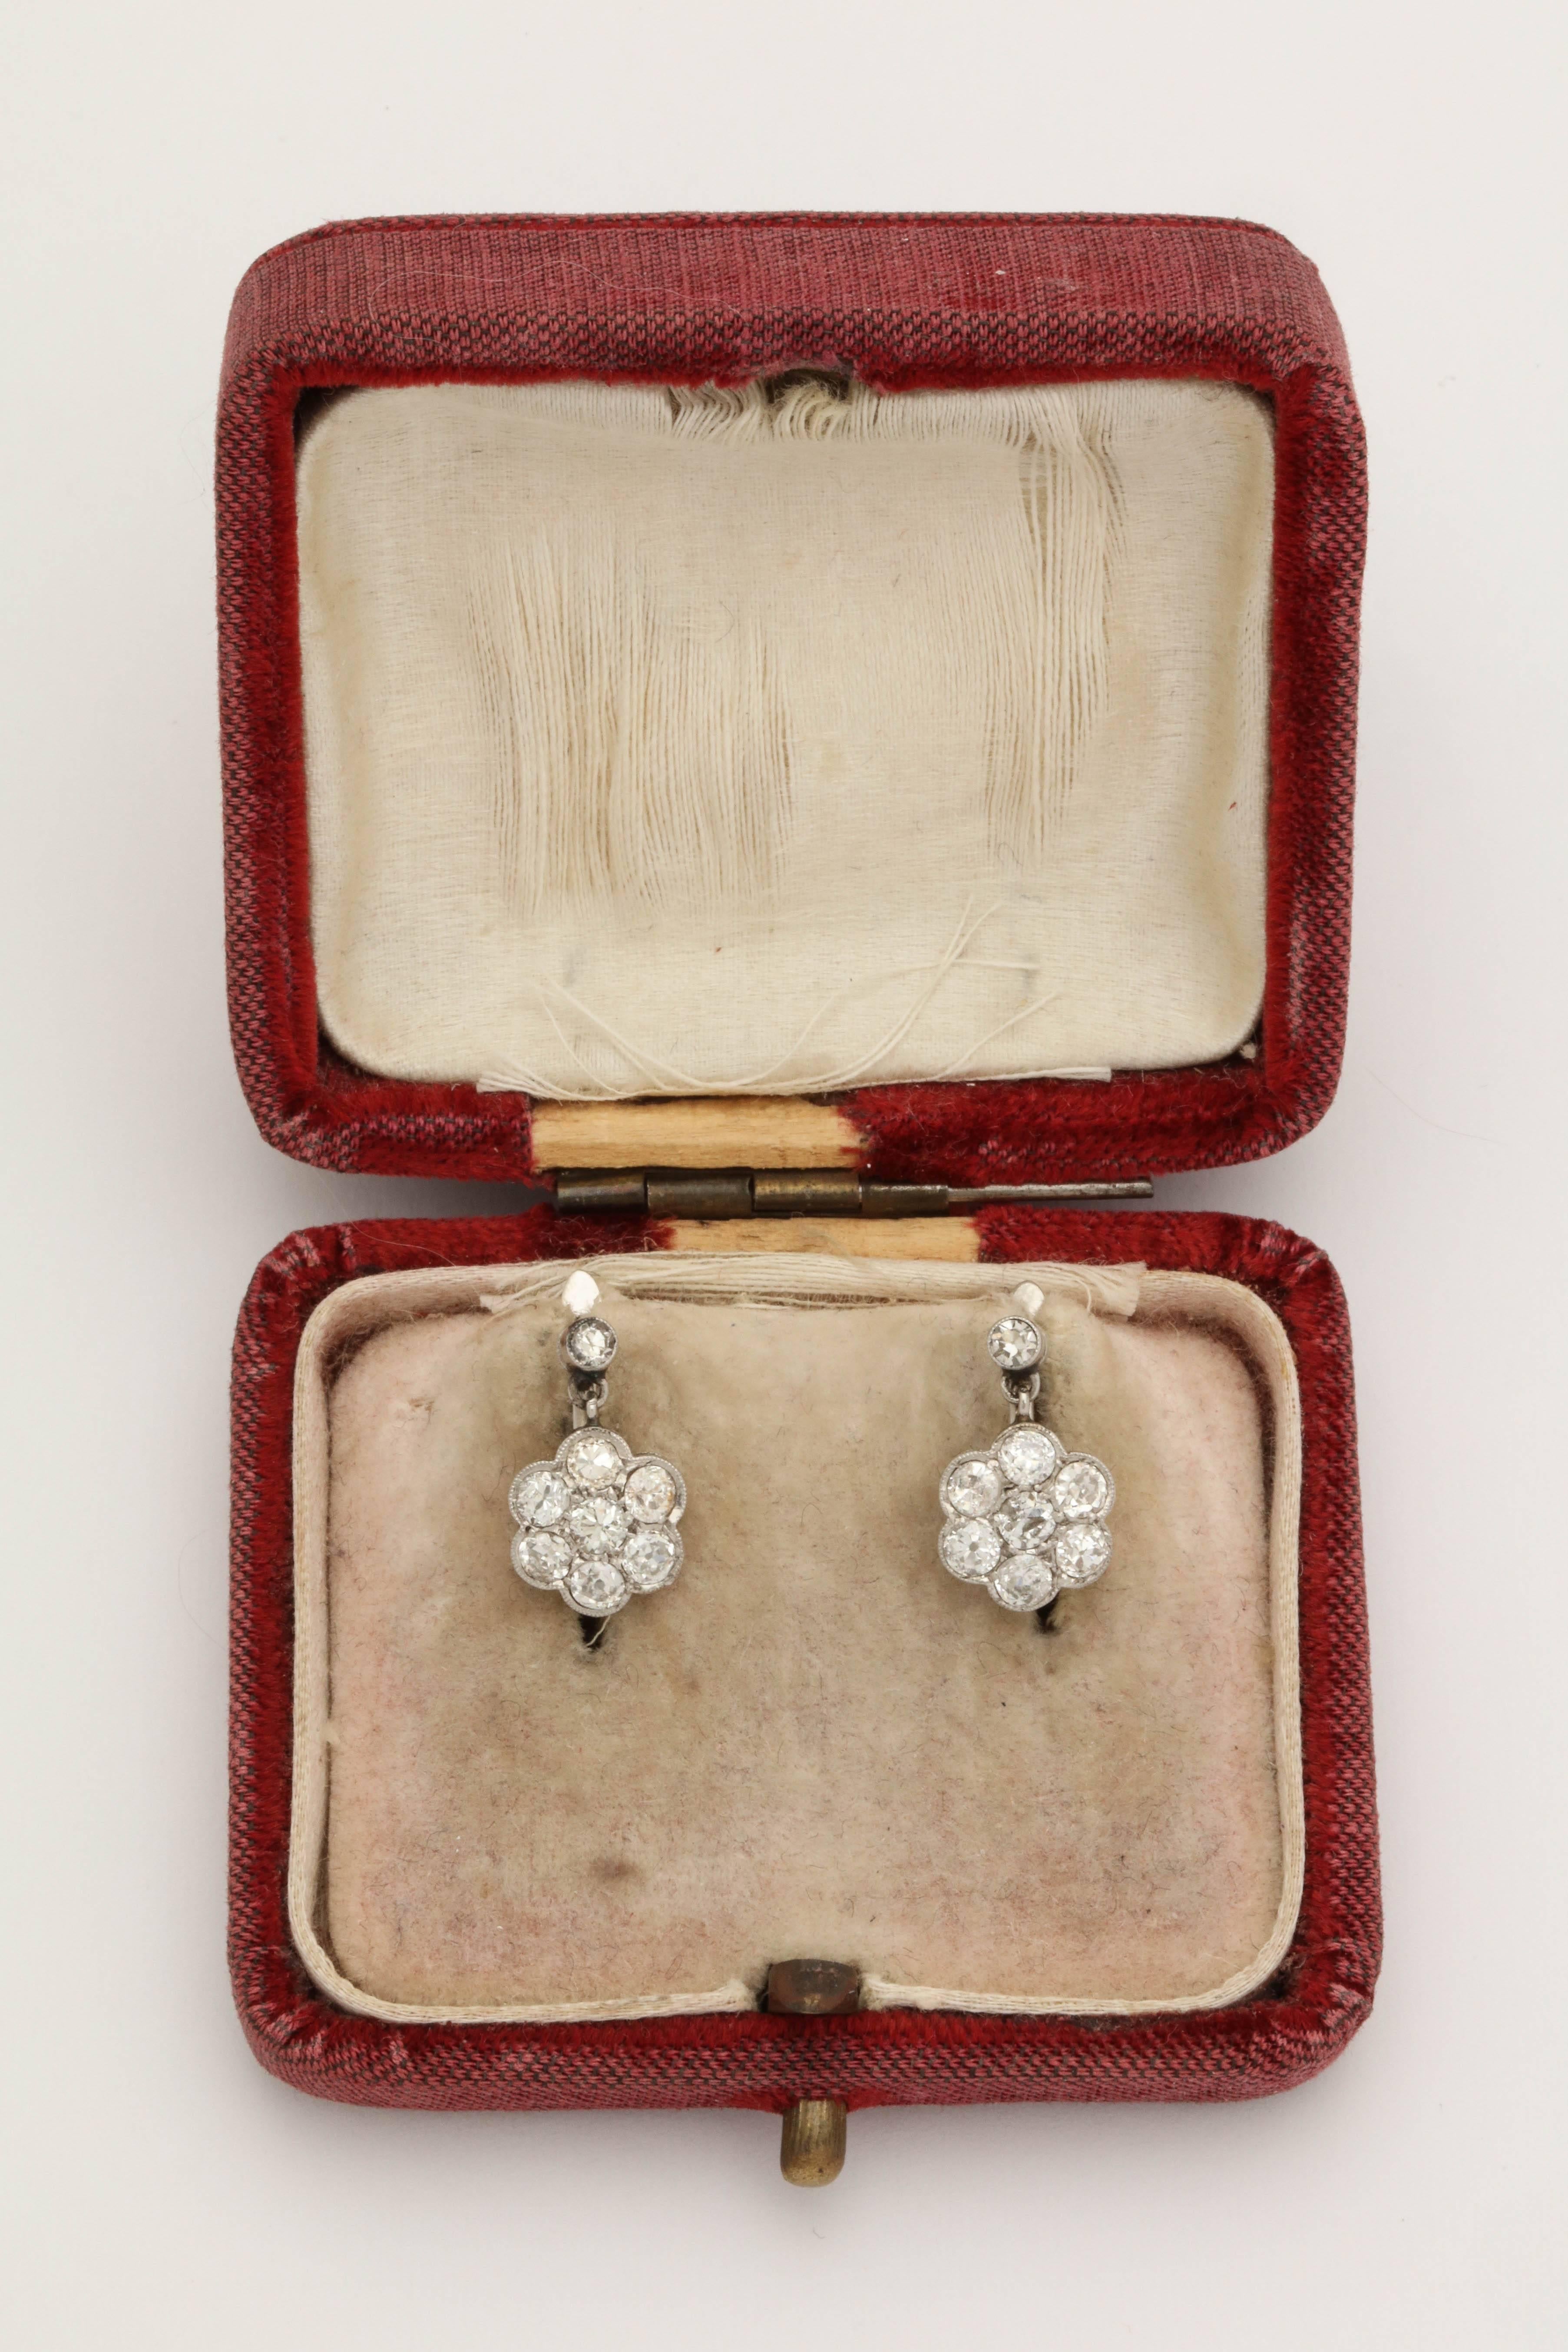 One Pair Of Ladies  Art Deco Delicate Rosetta Design Floral Cluster Diamond Drop earrings Composed Of 16 Antique Cut Diamonds Weighing Approximately 1.50 Cts Total Diamond weight. Earrings Designed With French Back Lever Style Backs For Pierced Ears